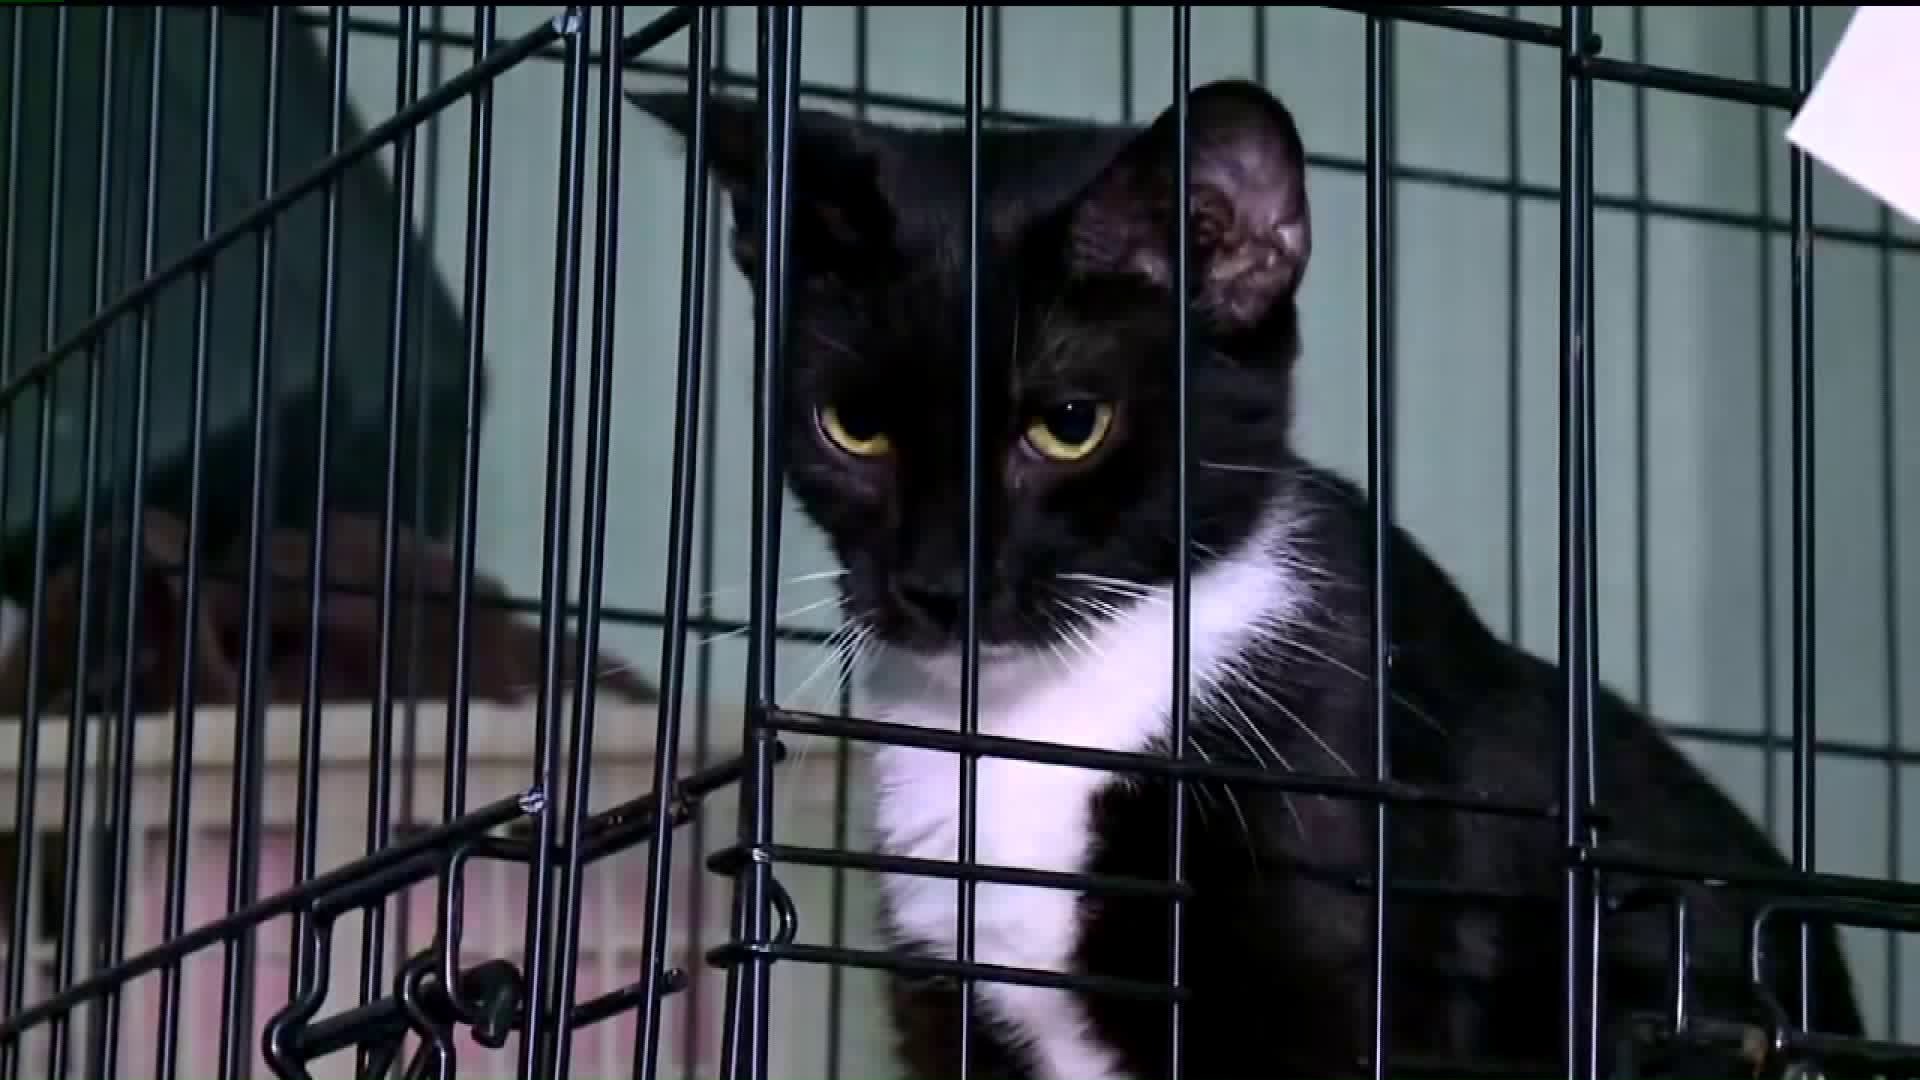 Shelters Overloaded with Cats